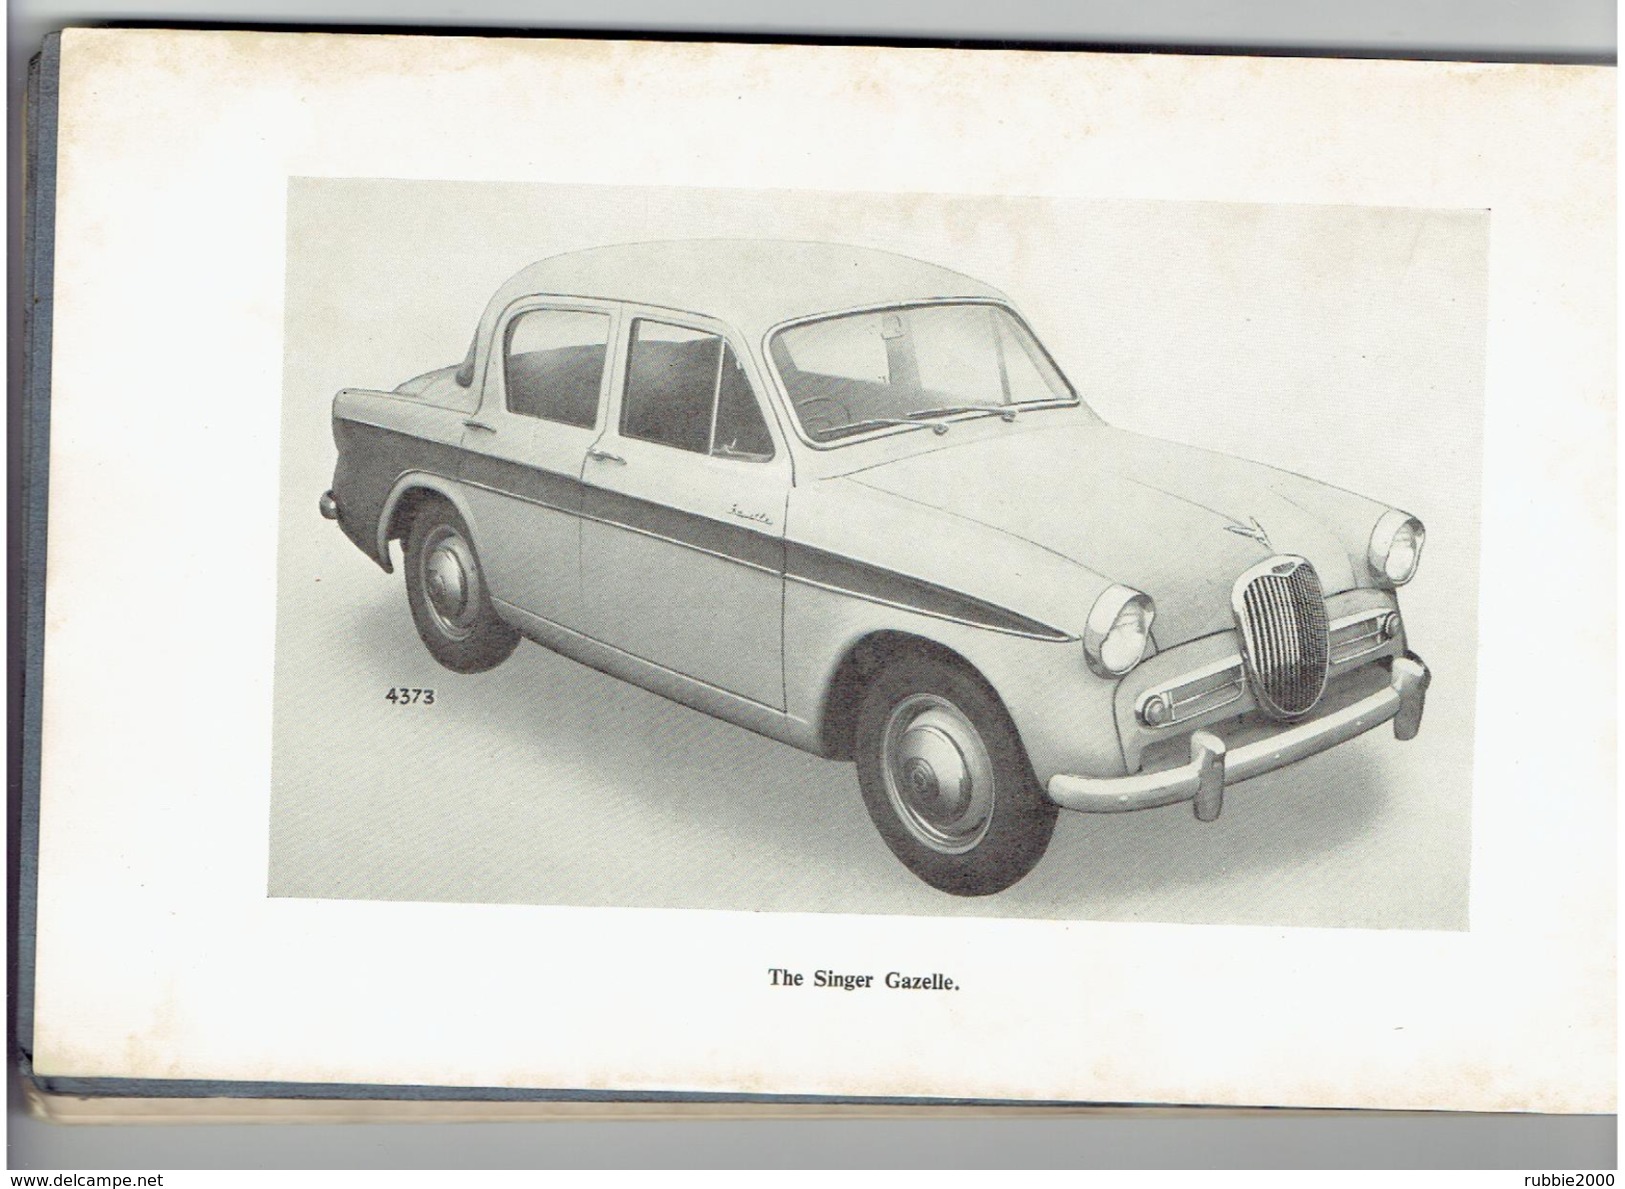 THE SINGER GAZELLE OWNERS HANDBOOK ISSUED 1958 SINGER MOTORS LIMITED COVENTRY ENGLAND A ROOTES PRODUCT - Transports